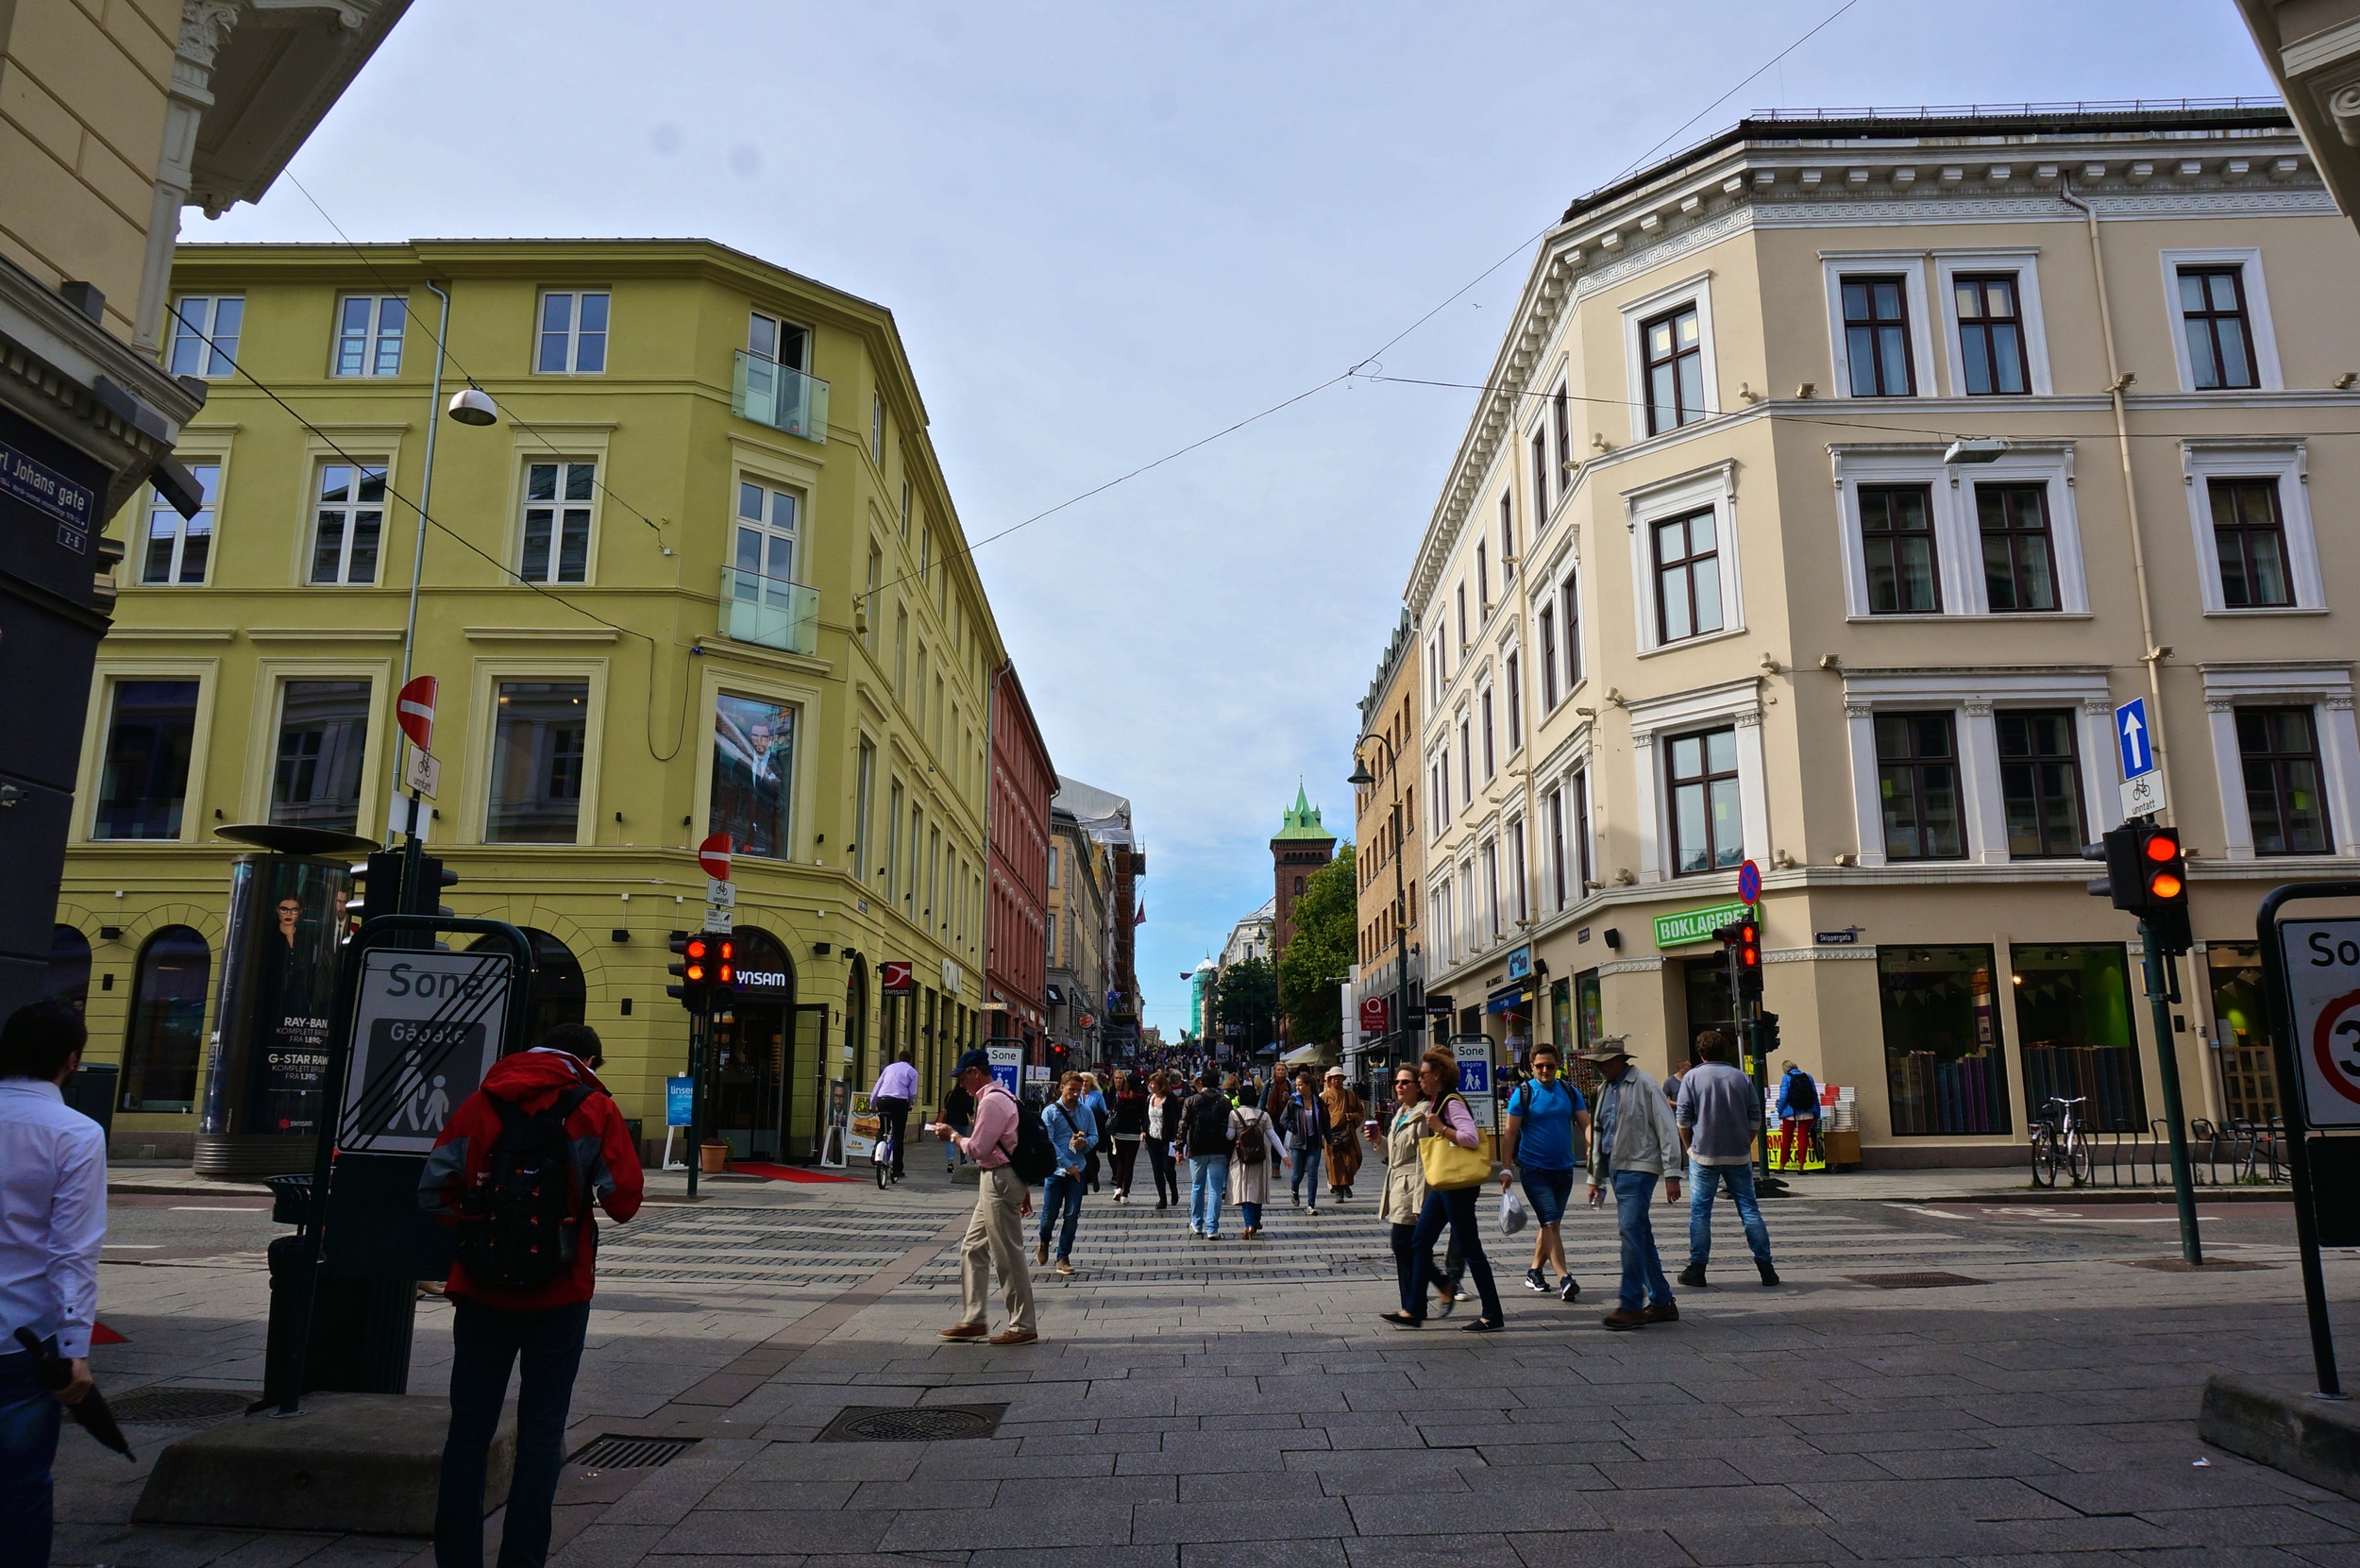 Oslo, Norway’s Best Souvenirs and Shopping